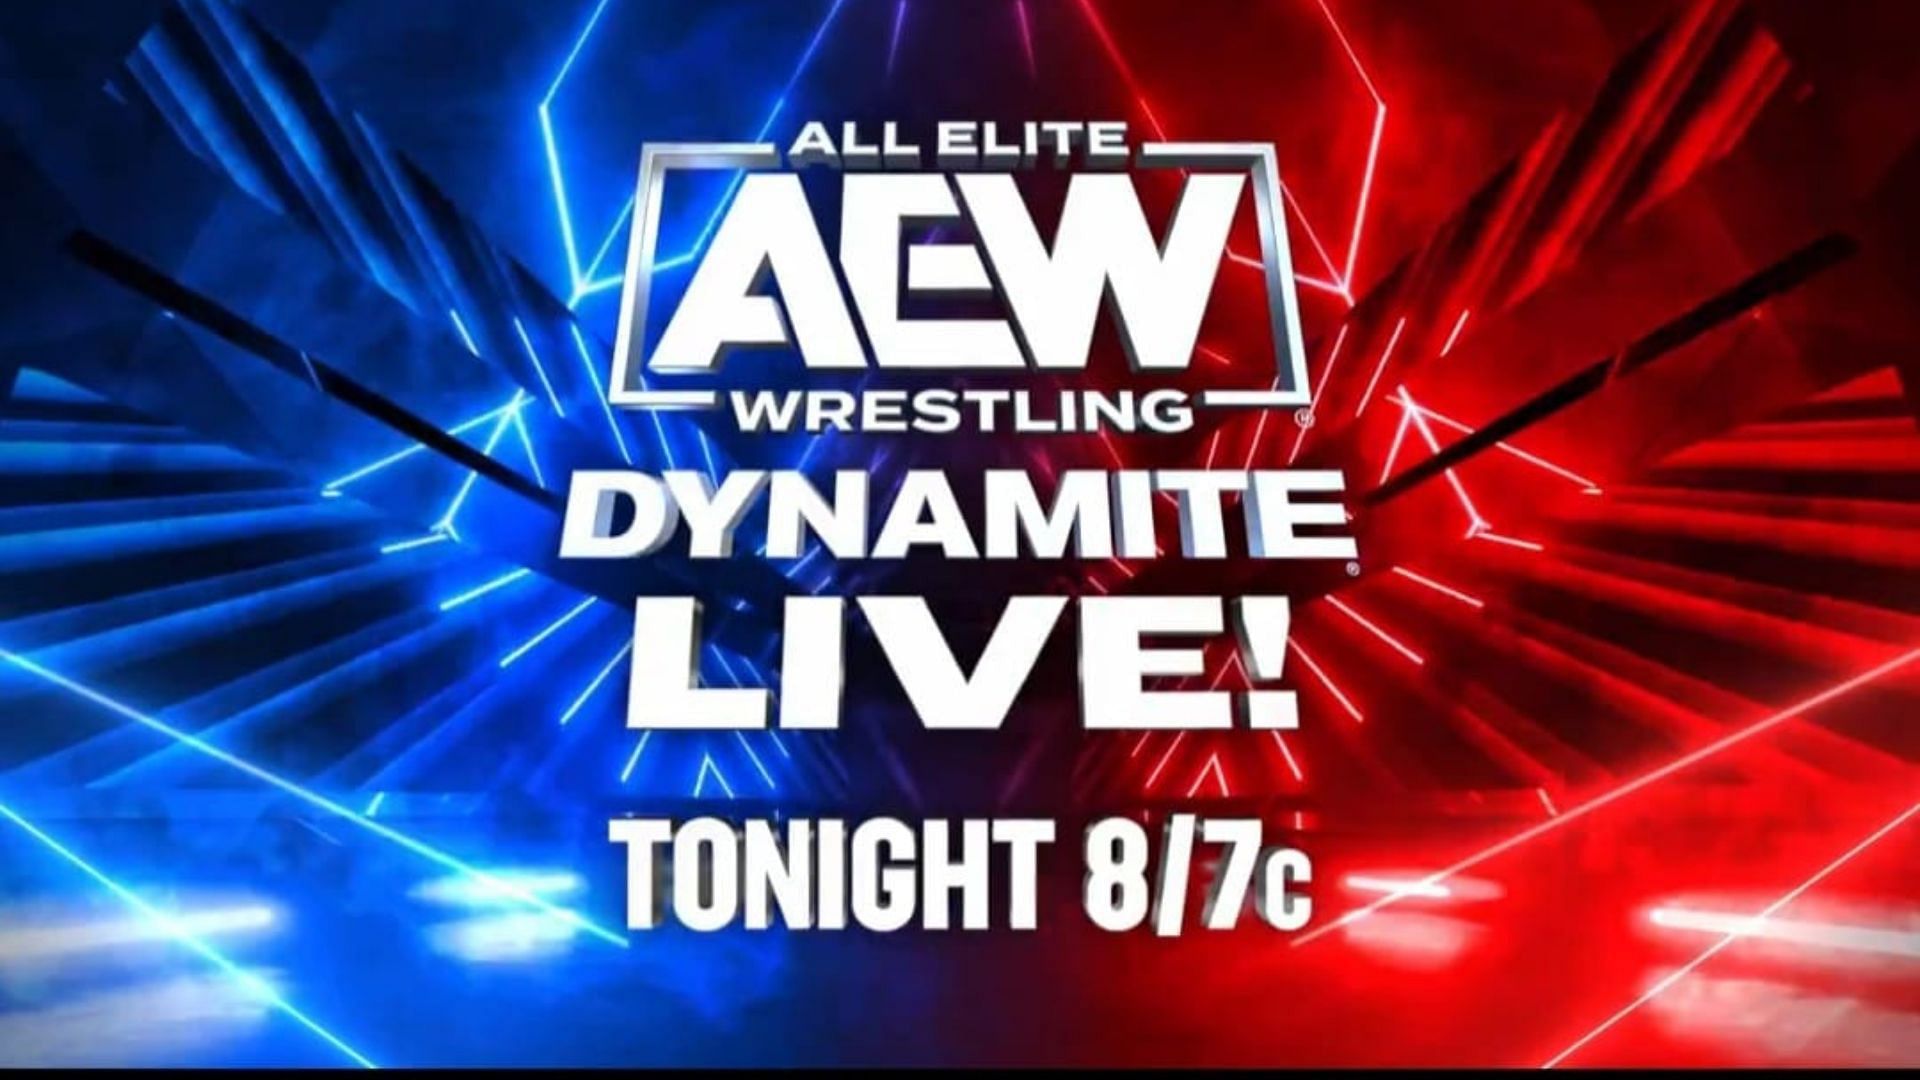 AEW Dynamite has a loaded card for its return to Daily